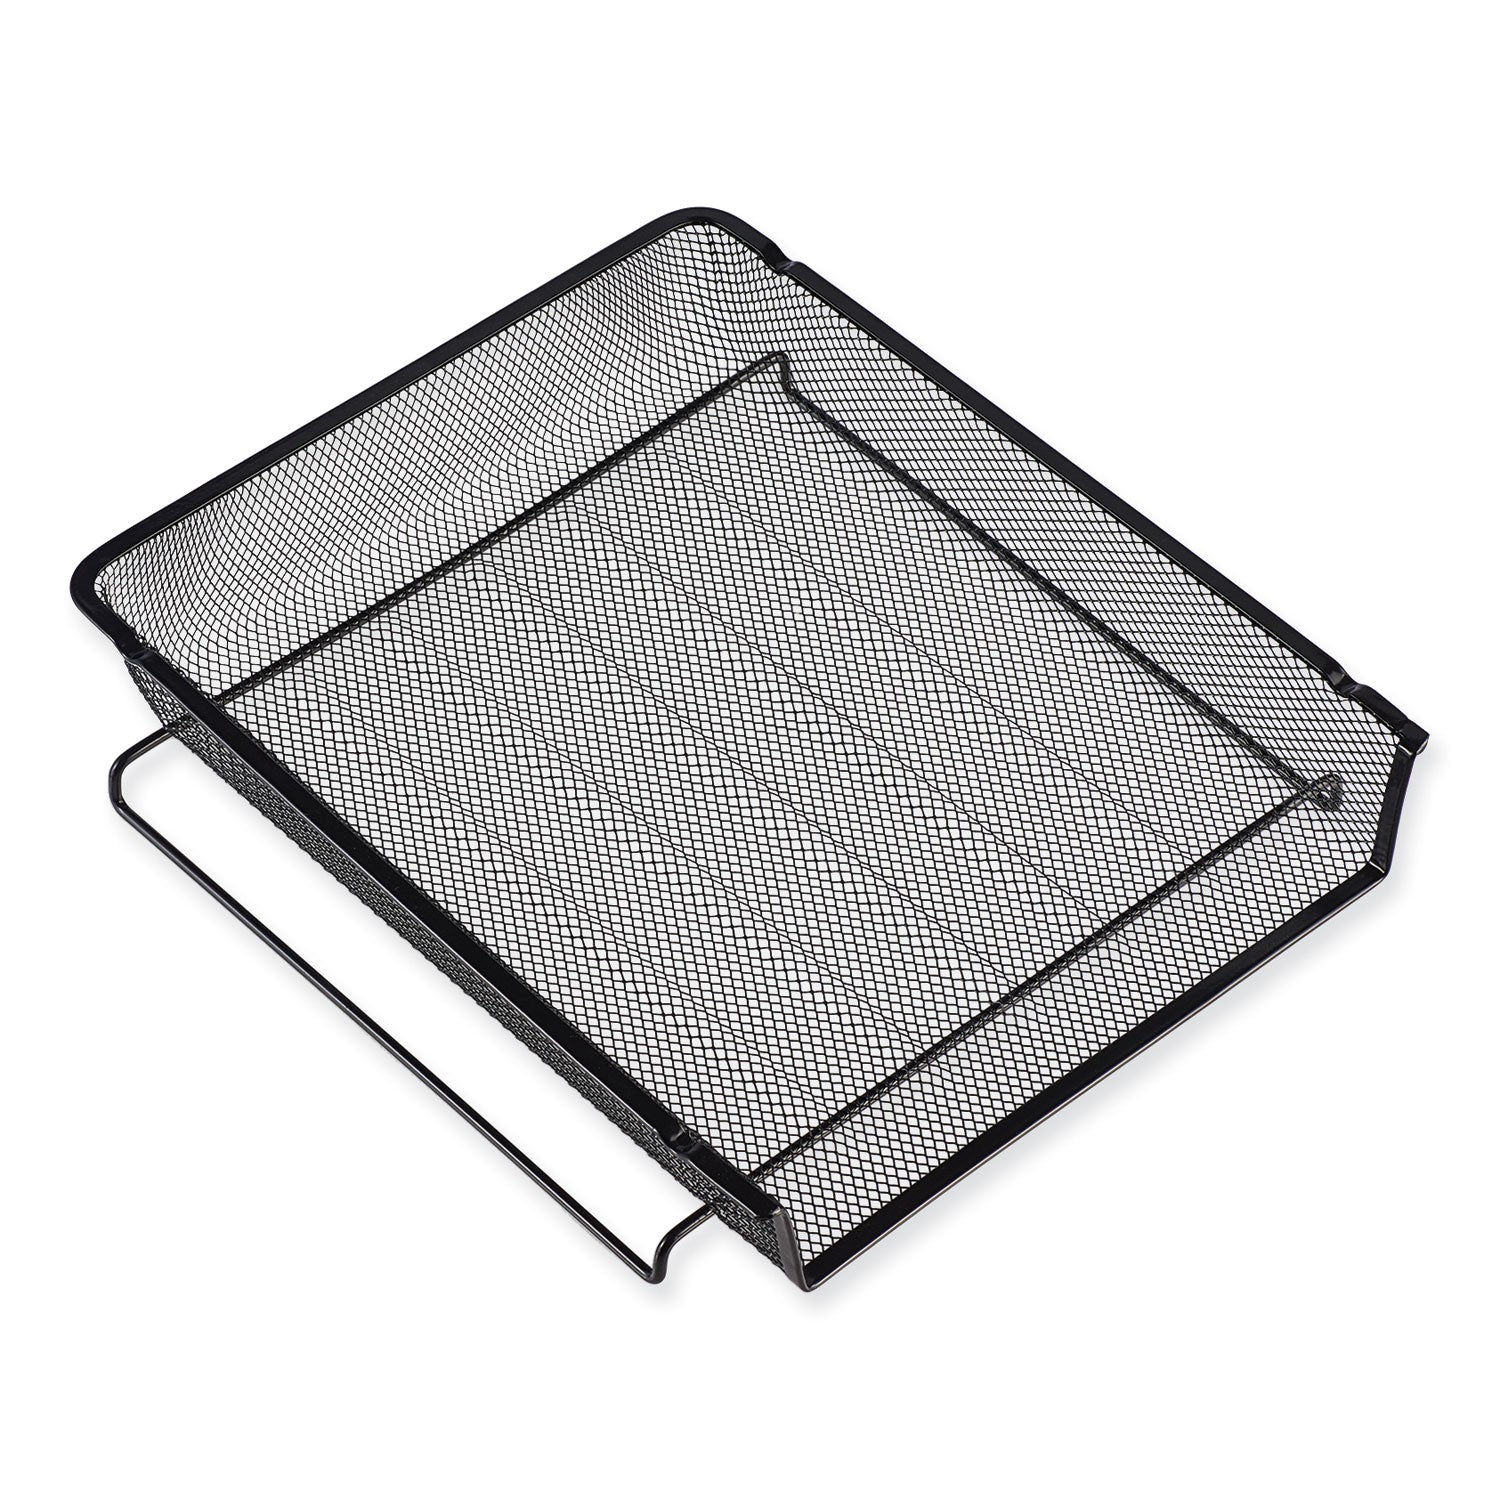 Deluxe Mesh Stacking Side Load Tray, 1 Section, Legal Size Files, 17"" x 10.88"" x 2.5"", Black - Flipcost